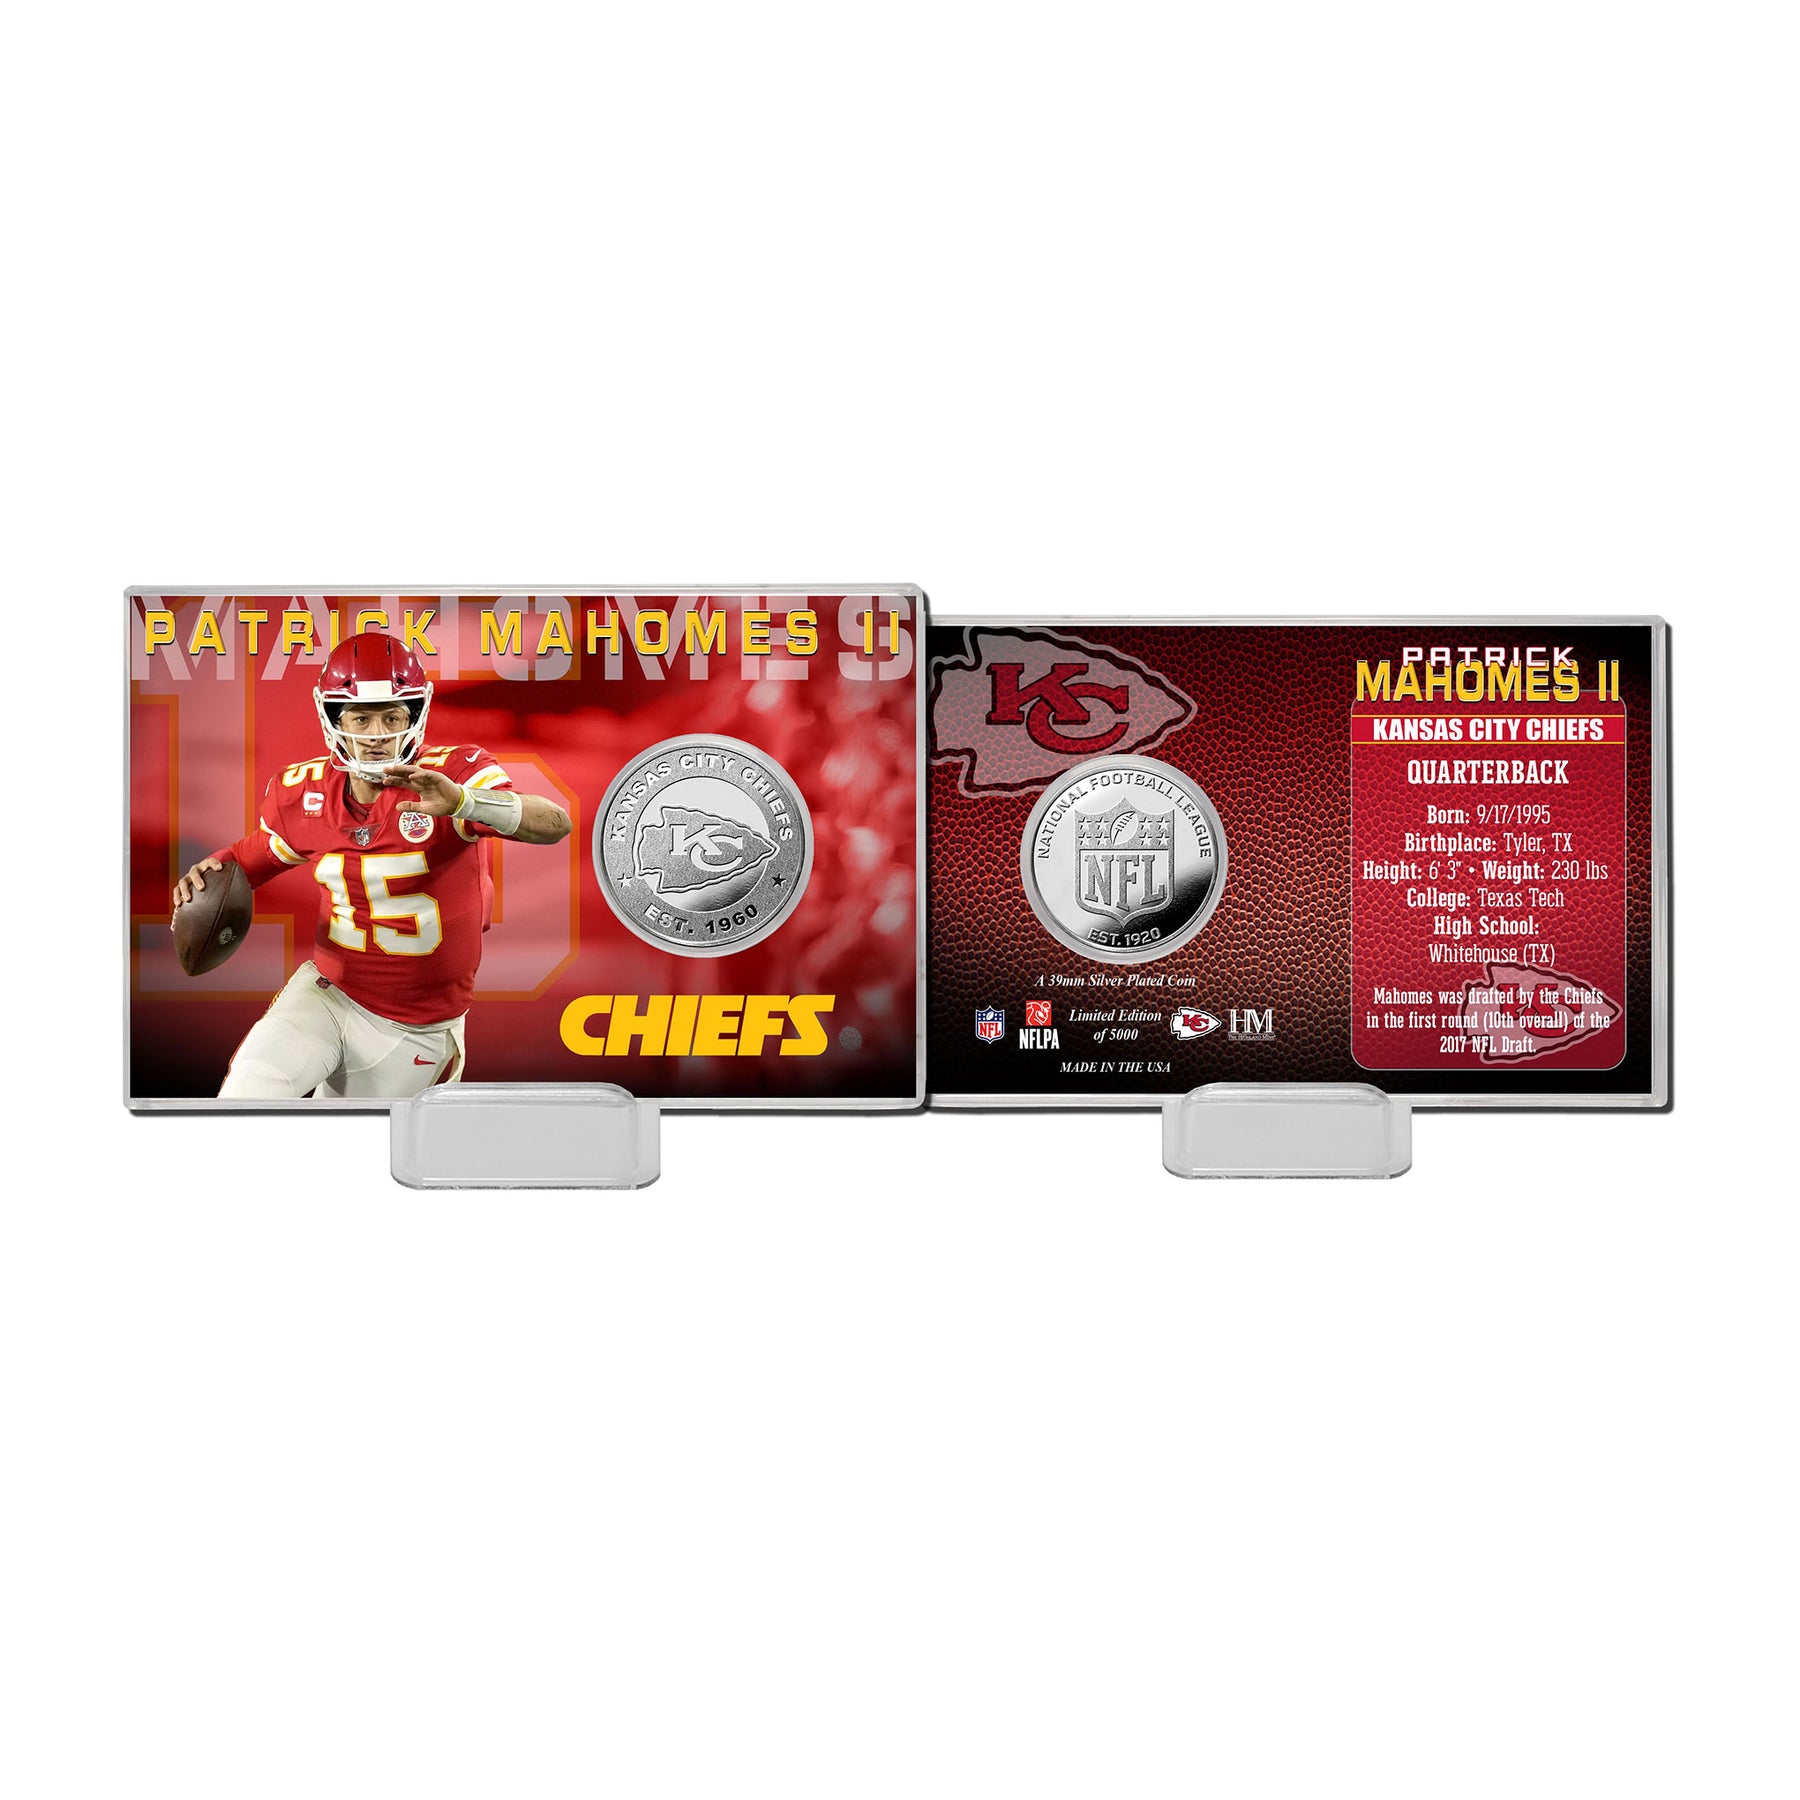 Patrick Mahomes (Chiefs) Player Silver Mint Coin in Presentation Display